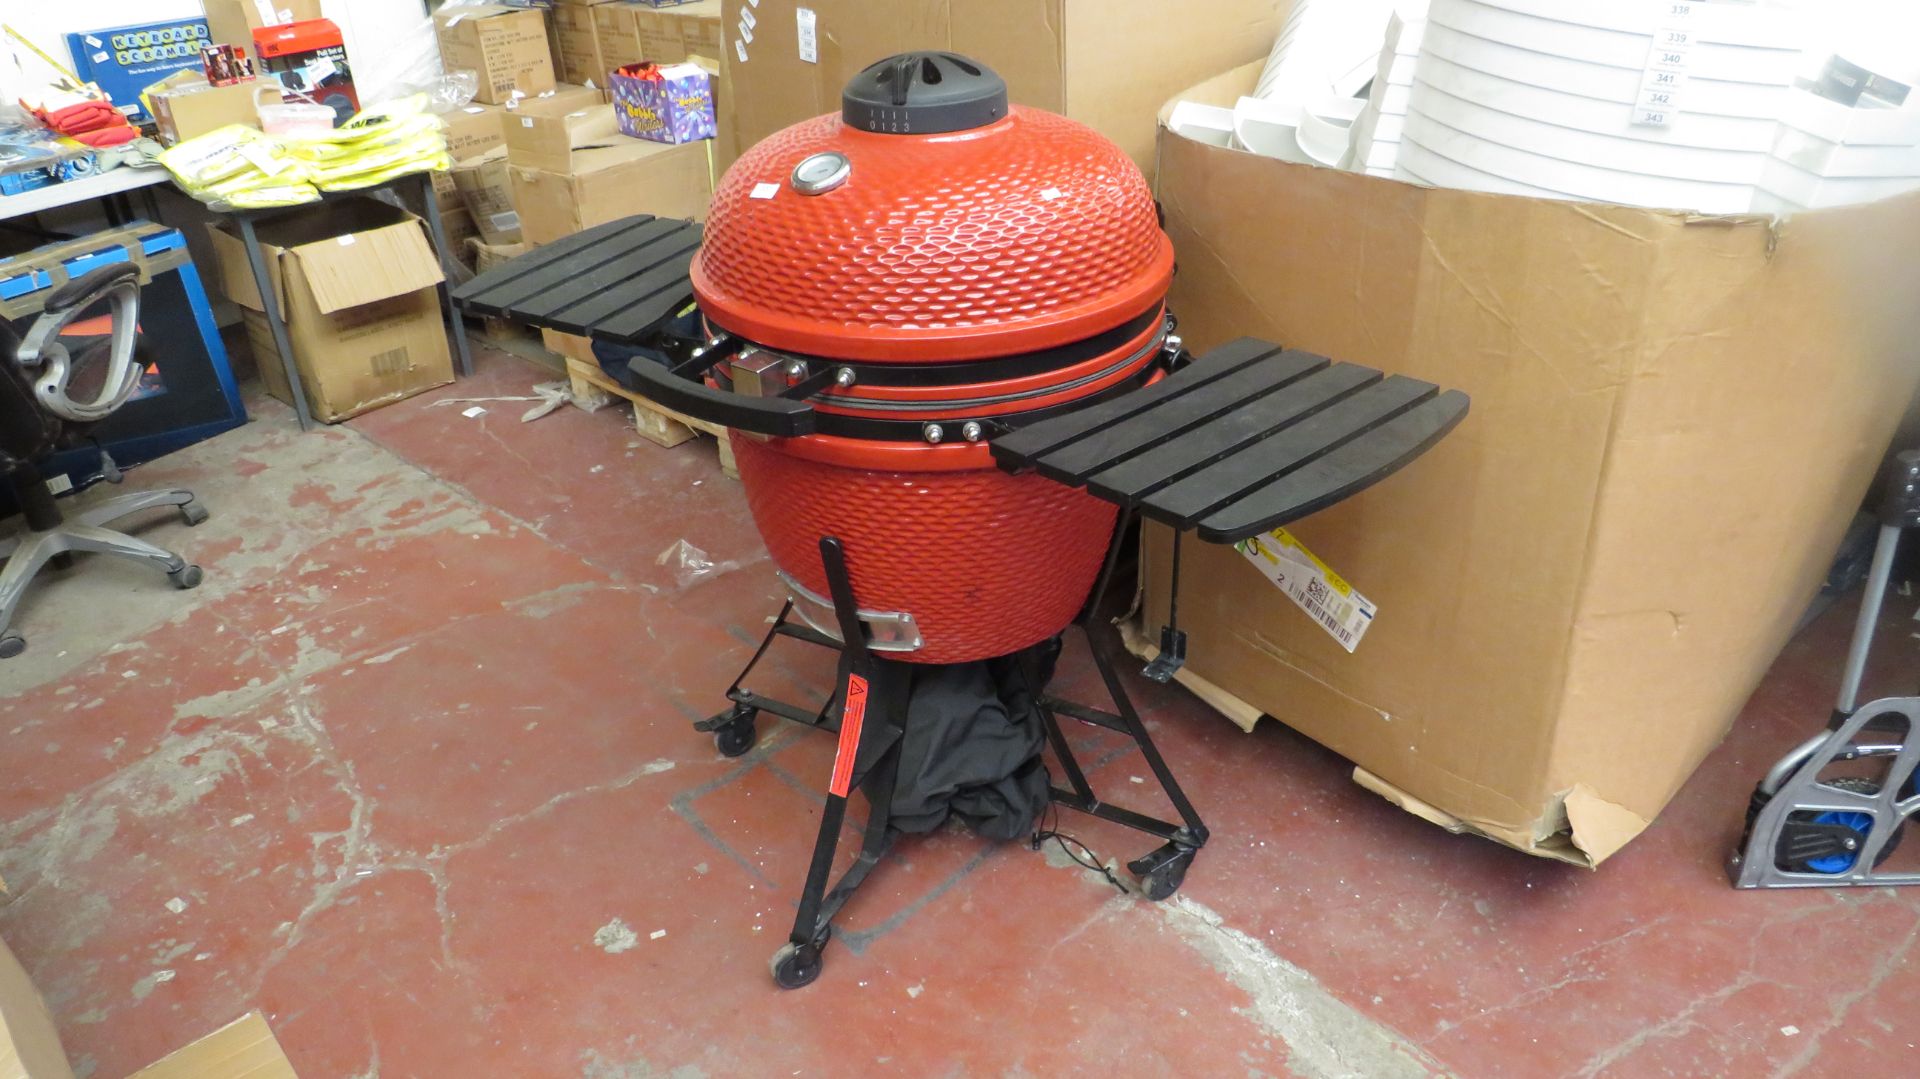 1X RED KOMAMDO LOUISIANA GRILL rrp £499.99 @ COSTCO UNCHECKED AND NO BOX, SEE PICTURE.